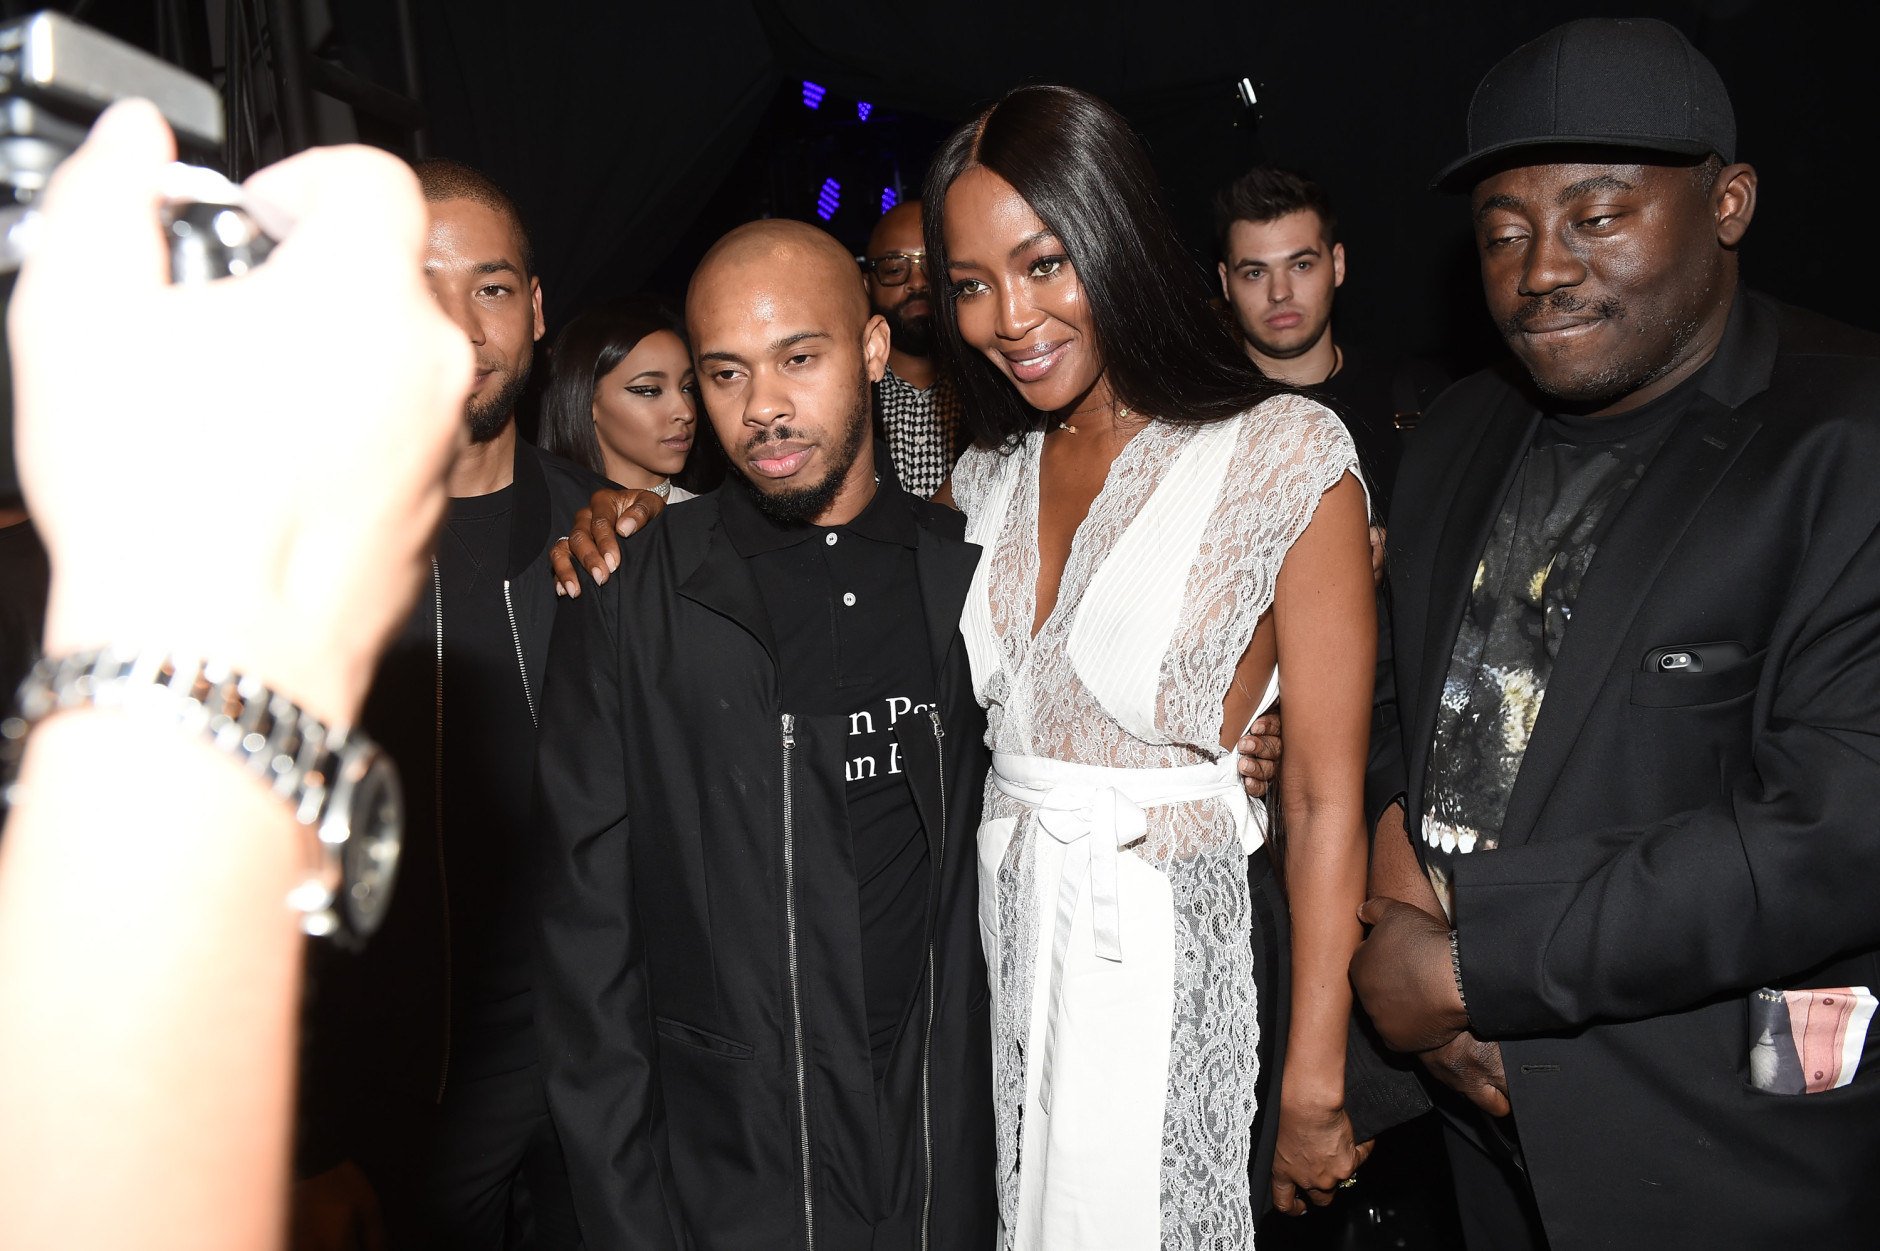 NEW YORK, NY - SEPTEMBER 11:  Shayne Olvier and Naomi Campbell  attend the Hood By Air fashion show during New York Fashion Week: The Shows at The Arc, Skylight at Moynihan Station on September 11, 2016 in New York City.  (Photo by Nicholas Hunt/Getty Images for New York Fashion Week: The Shows)